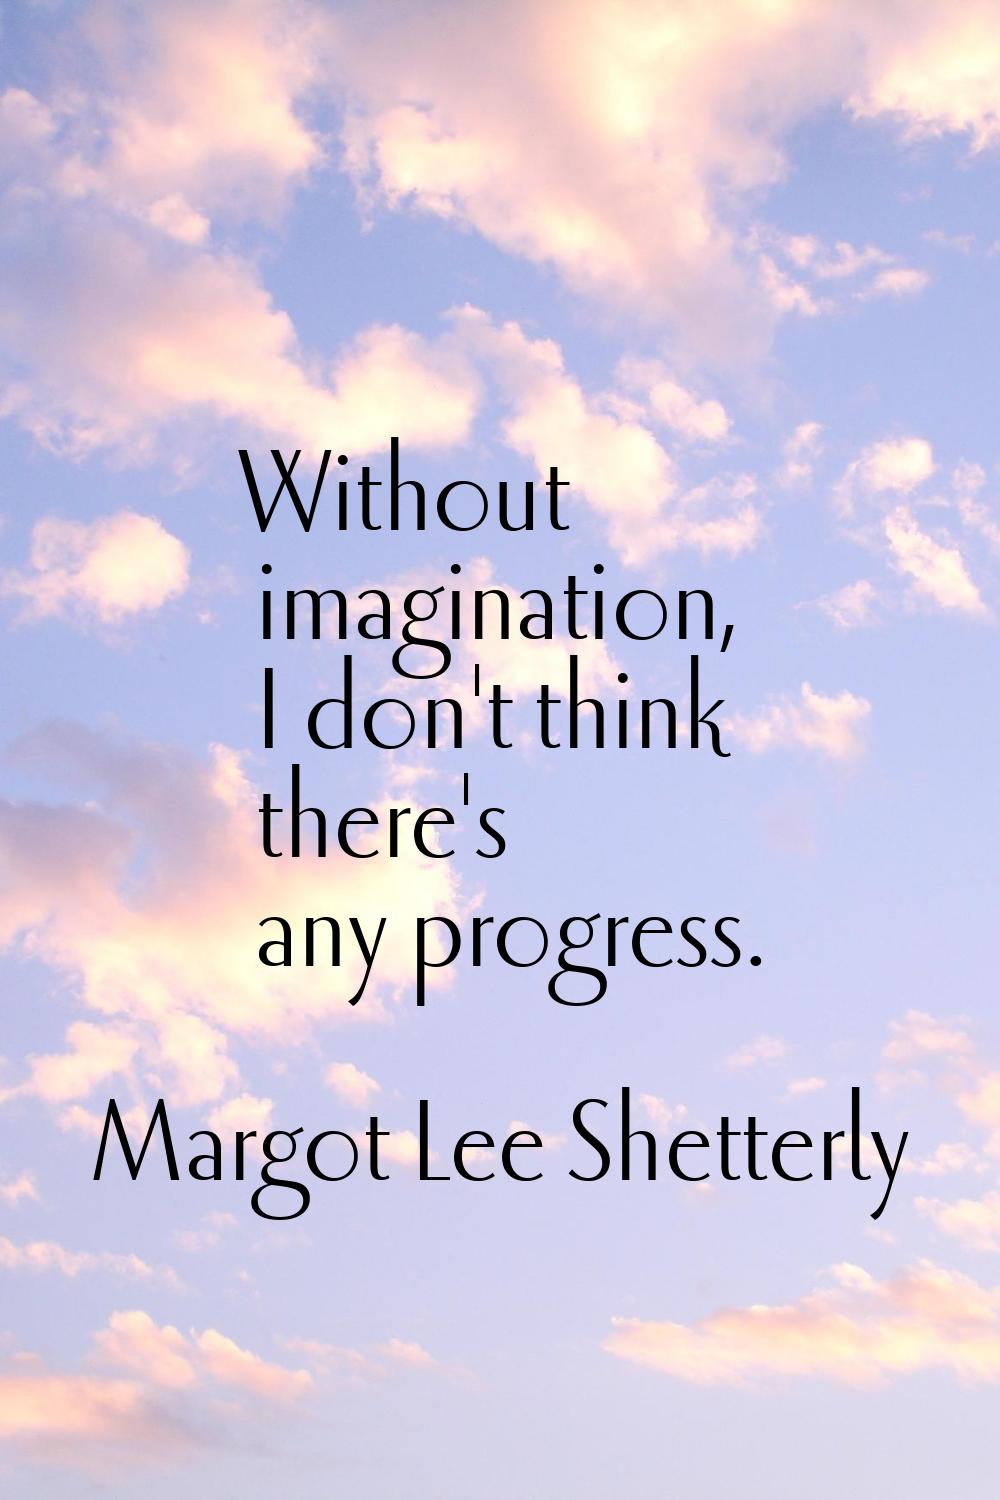 Without imagination, I don't think there's any progress.